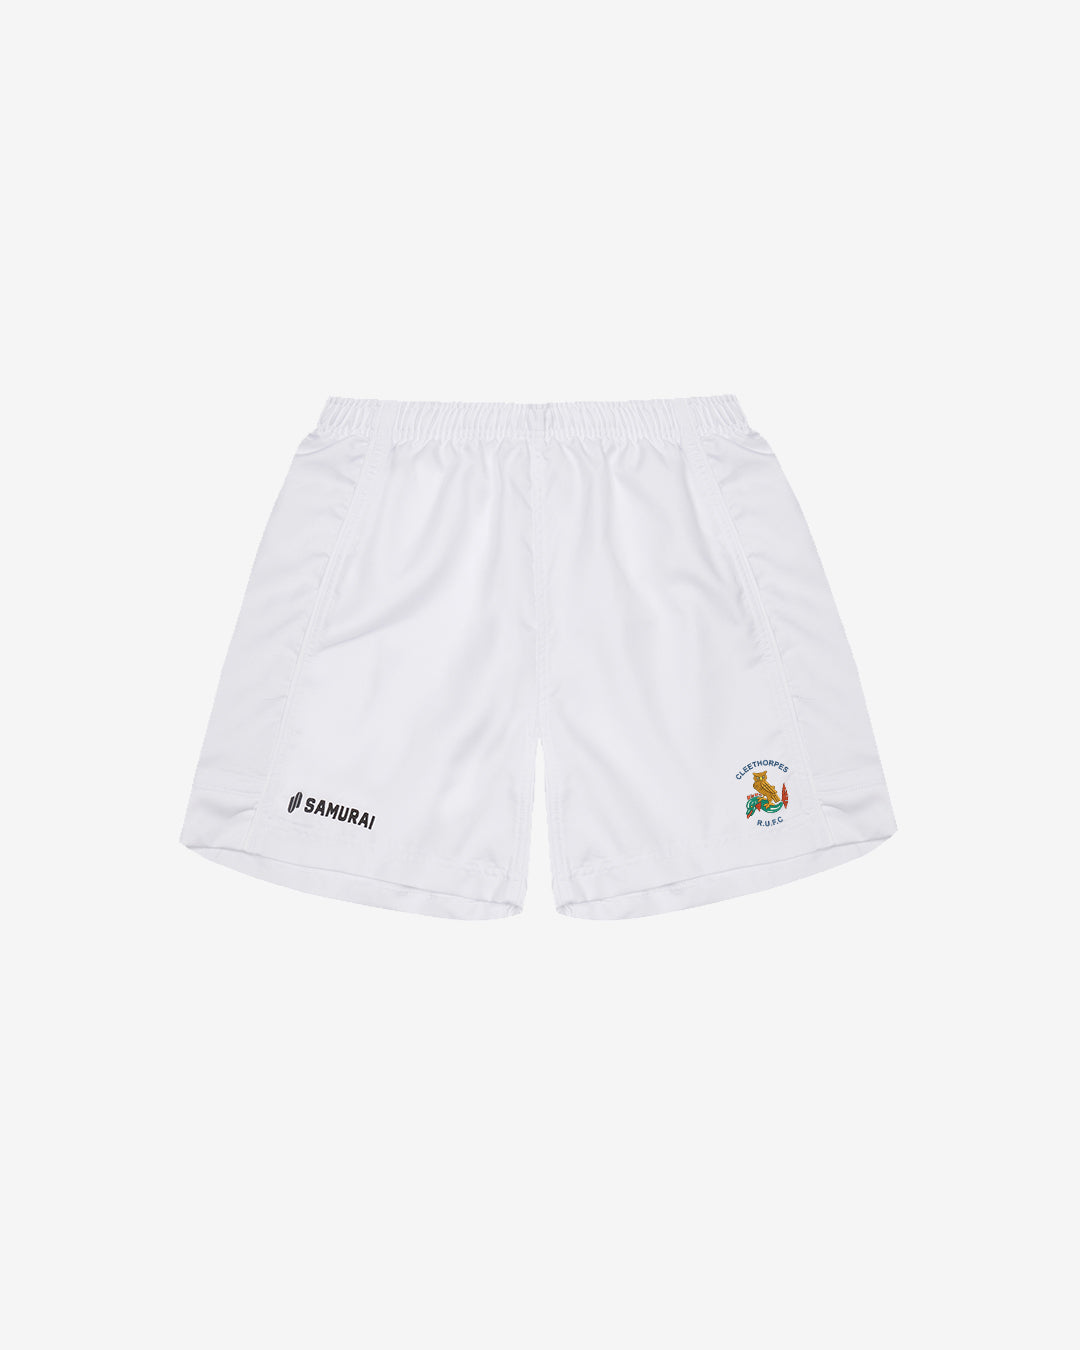 Cleethorpes RUFC - EP:0119 - Rugby Short - White